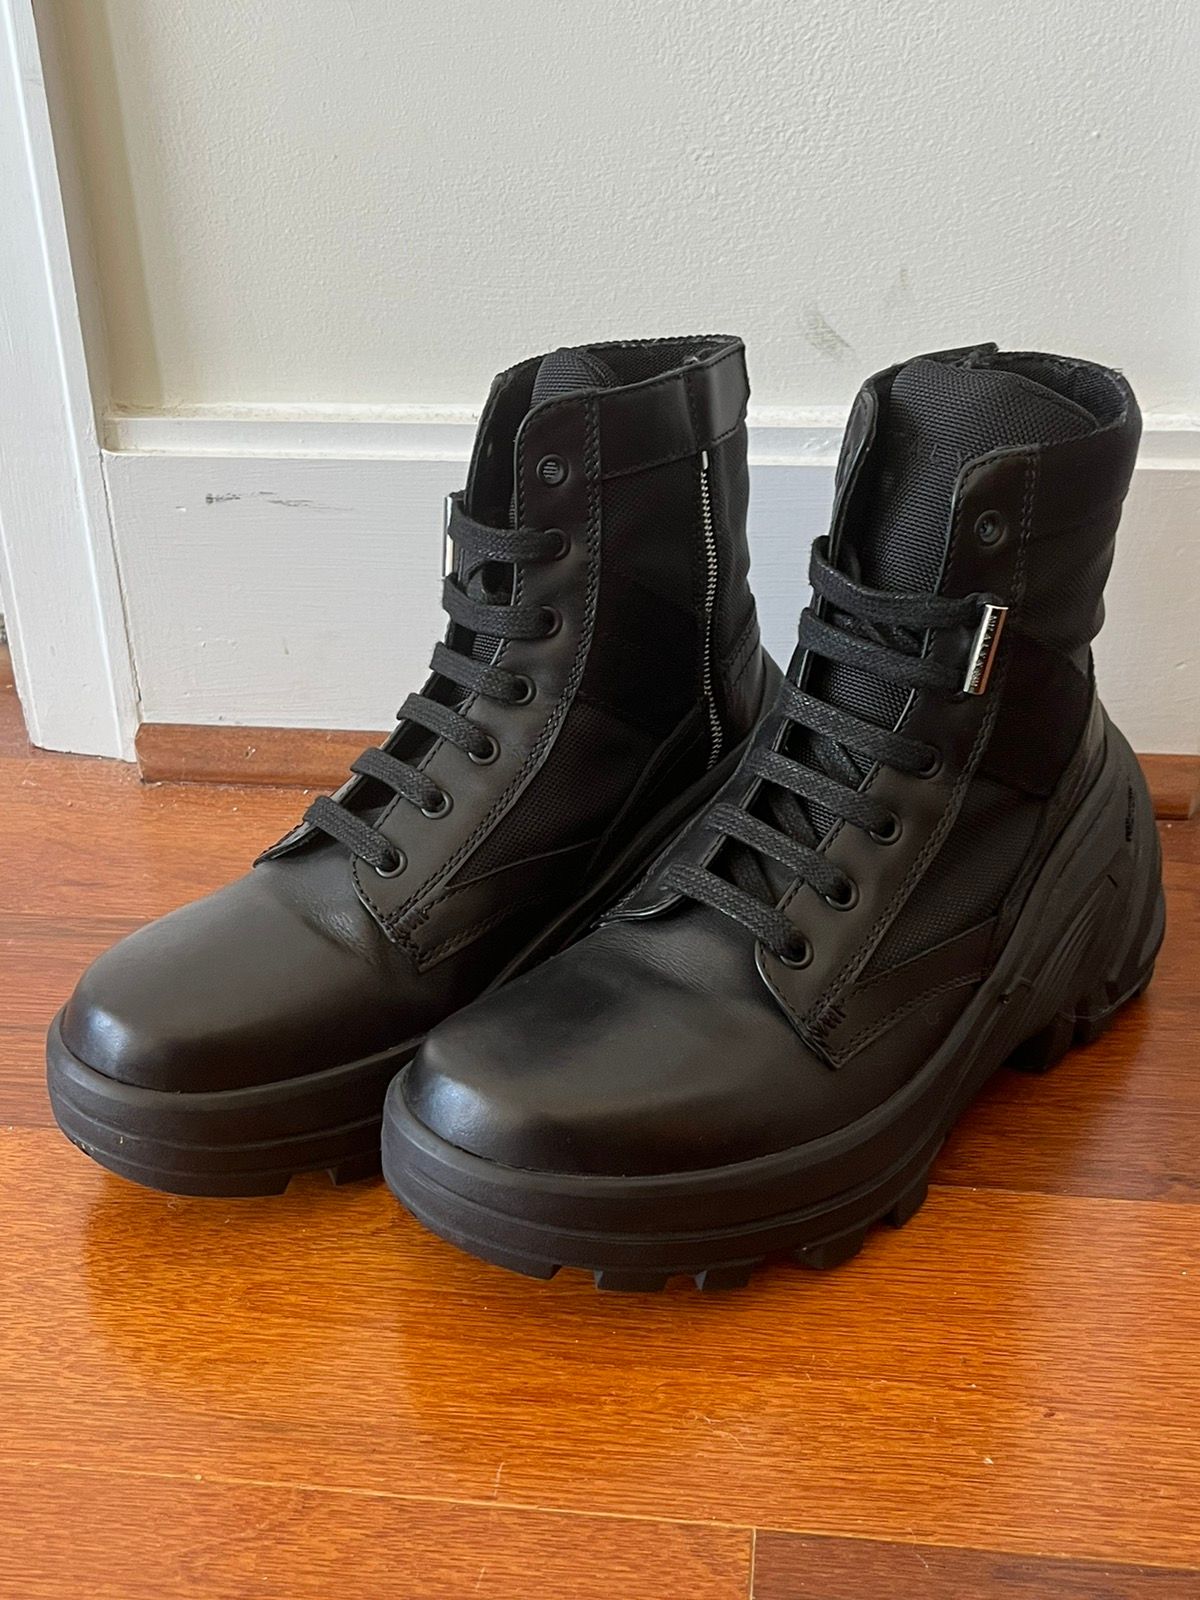 Vibram 1017 ALYX 9SM Lace-Up Boots | Grailed